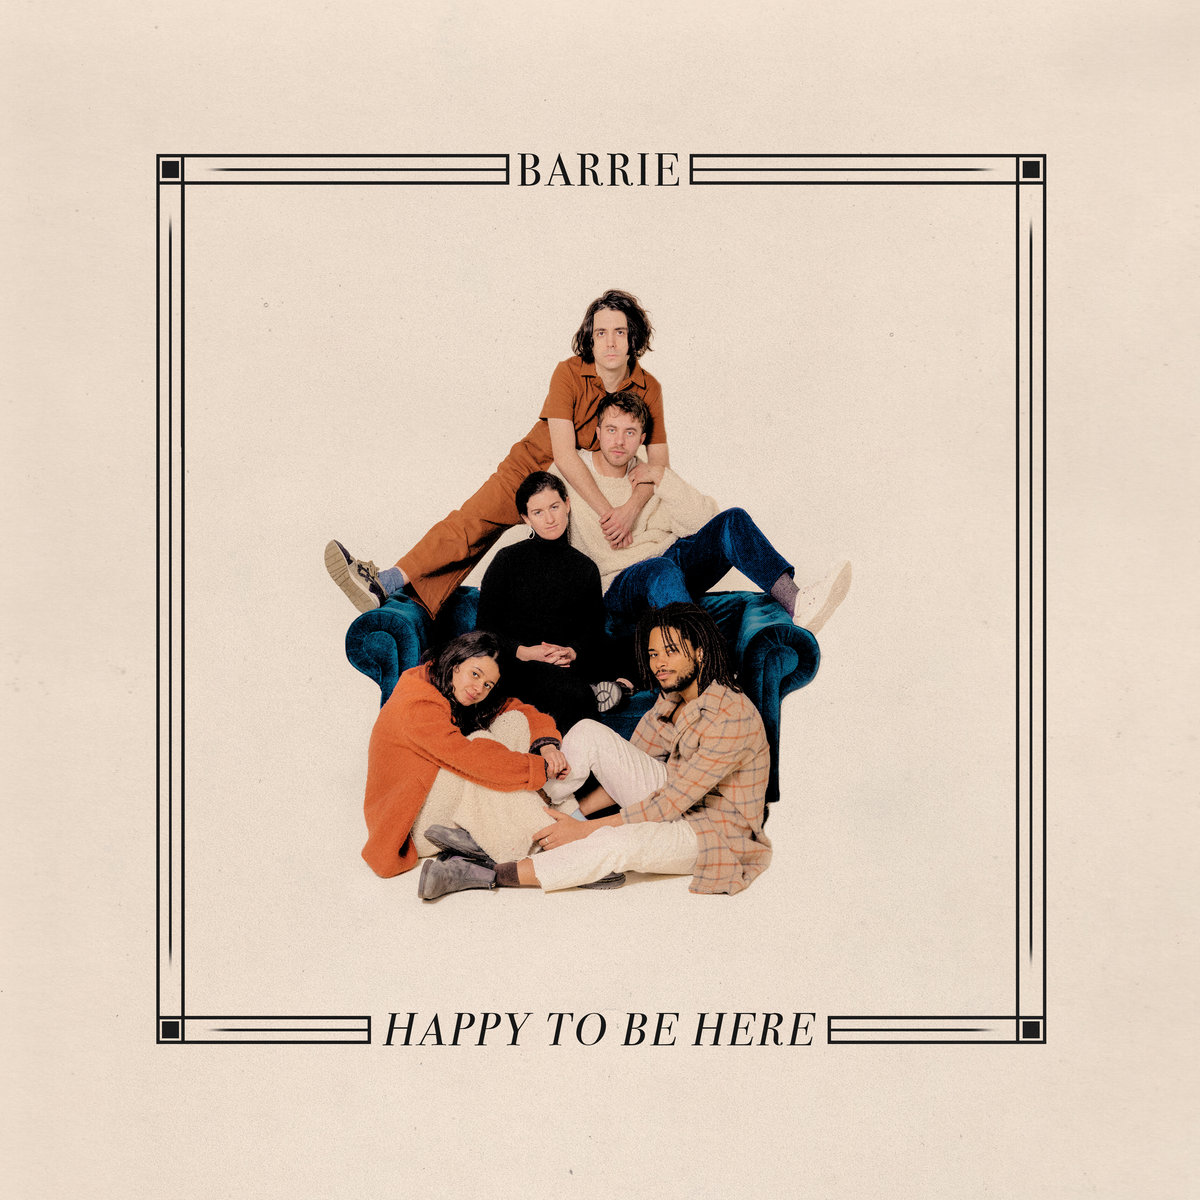 「Barrie - Happy To Be Here」の画像検索結果